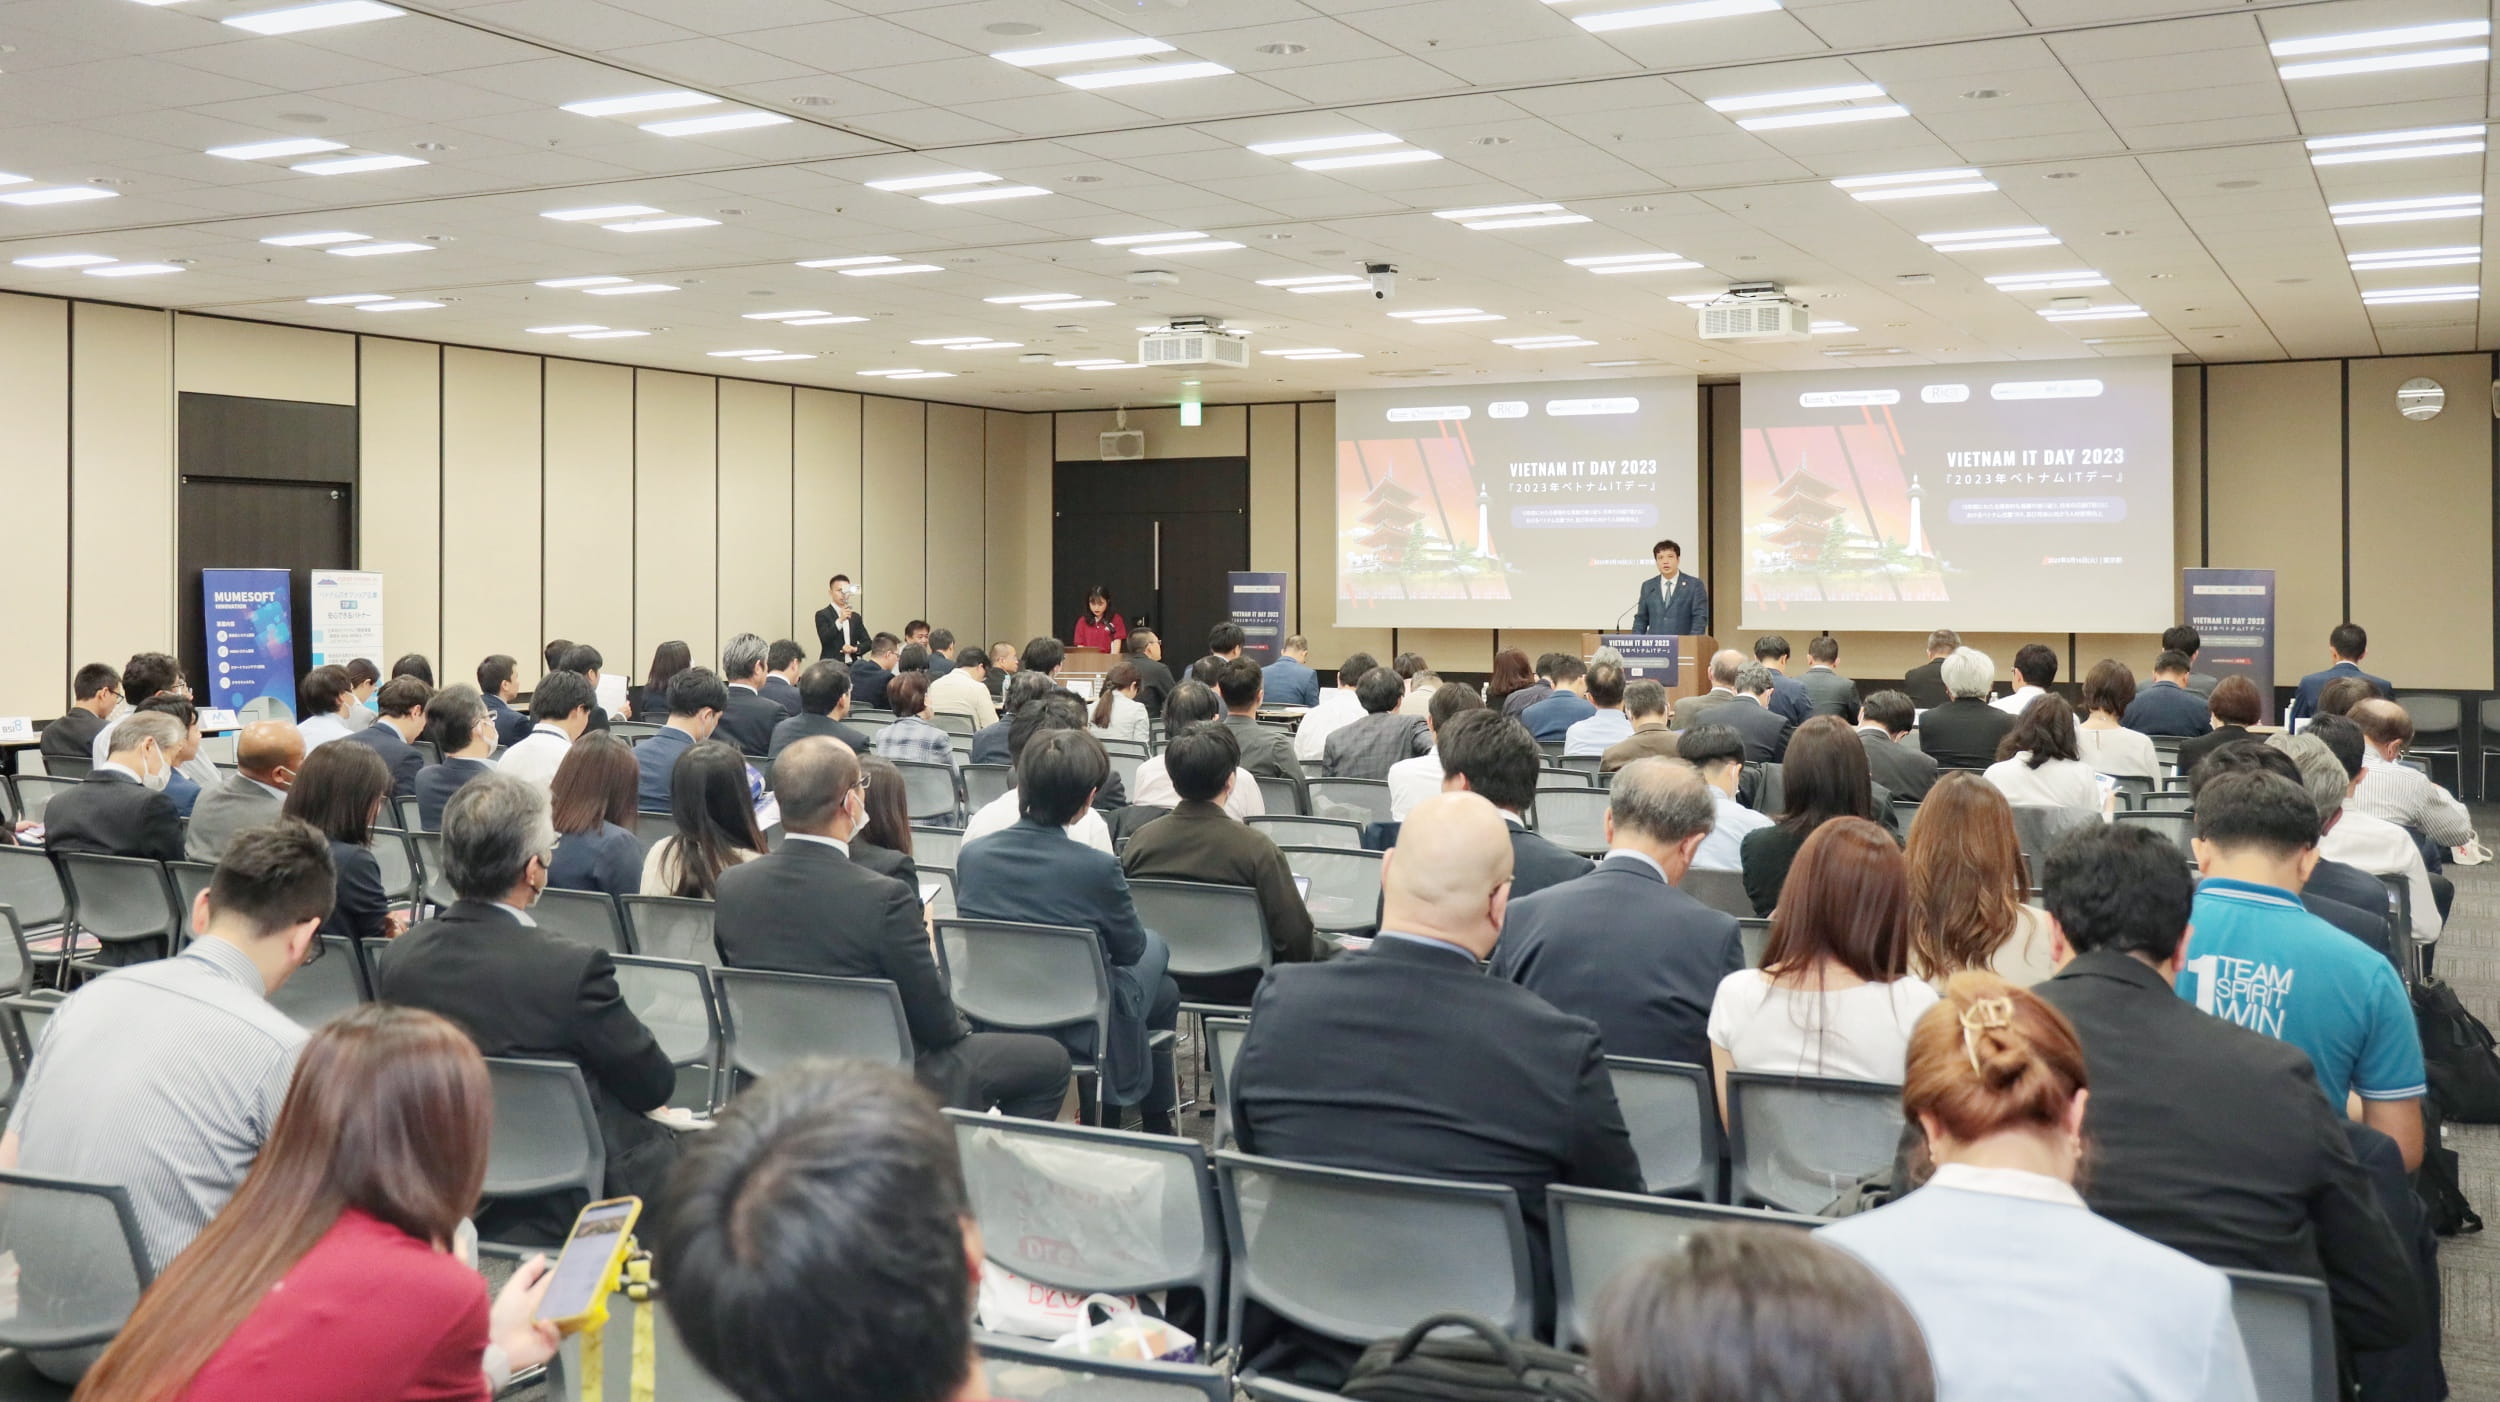 The event welcomed over 200 guests, including representatives from Japanese IT agencies, associations, and businesses.